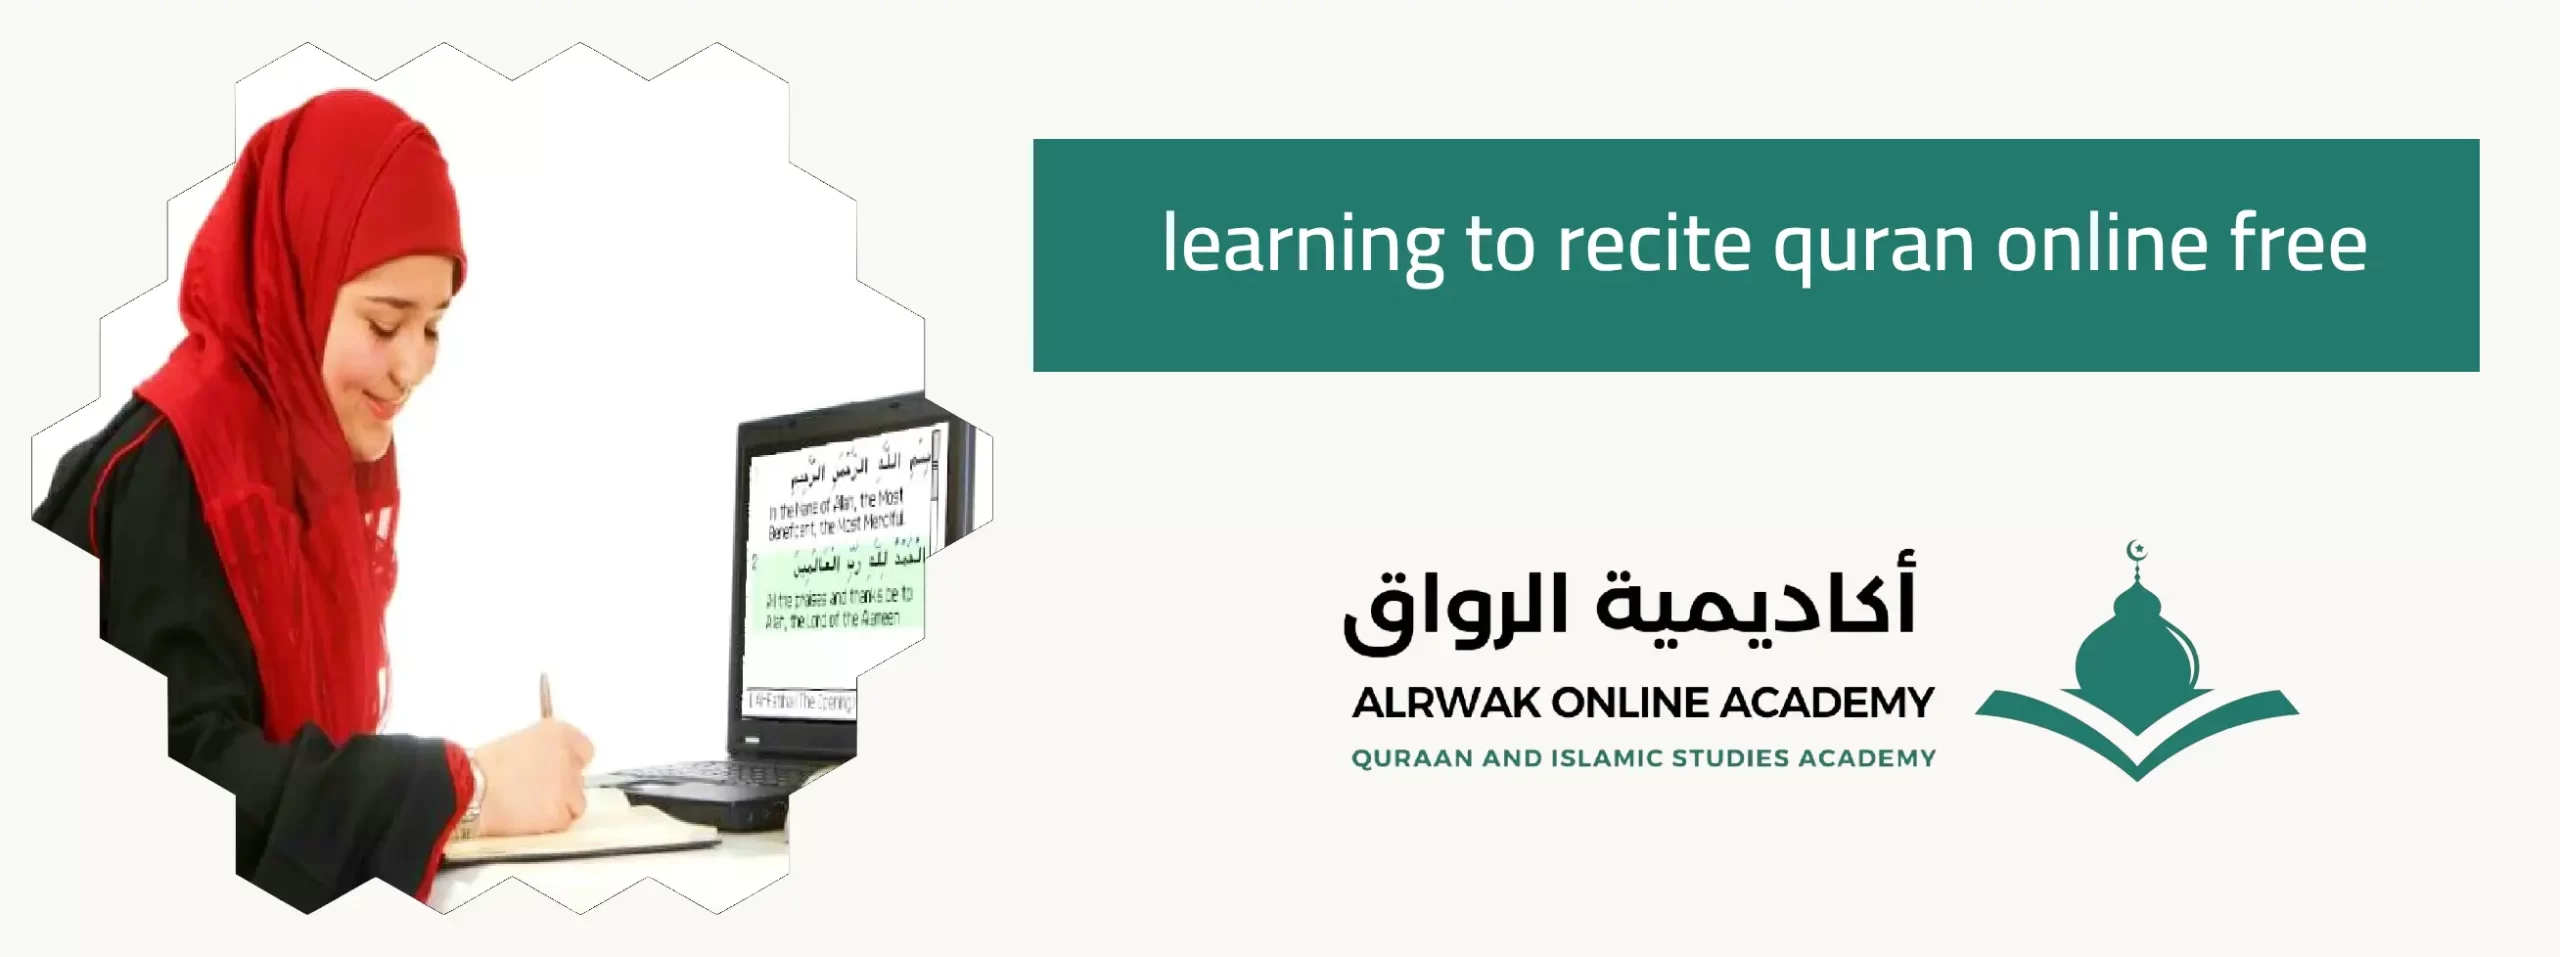 learning to recite quran online free